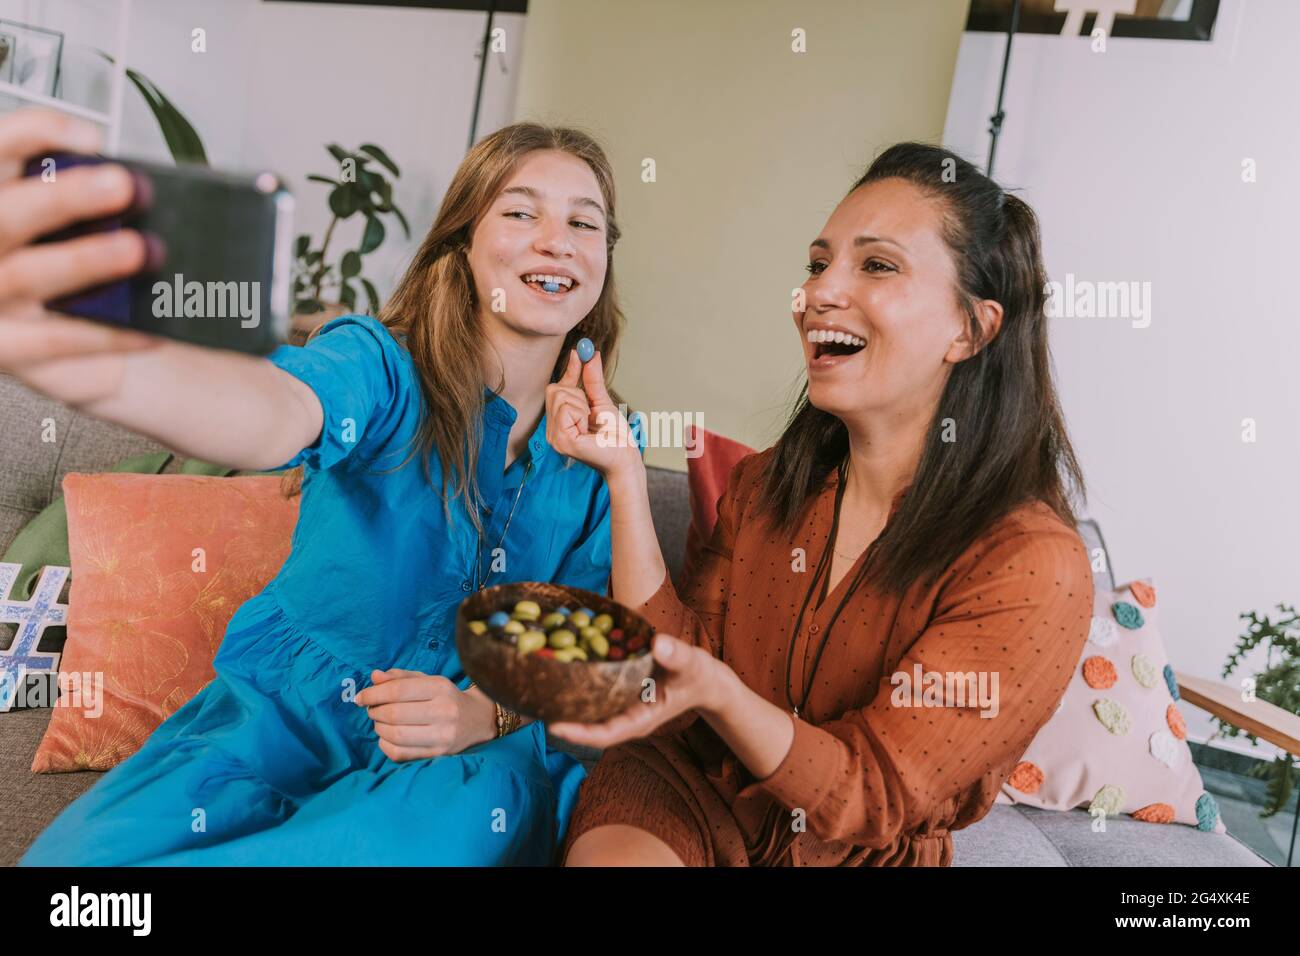 Women eating candies while filming at home Stock Photo